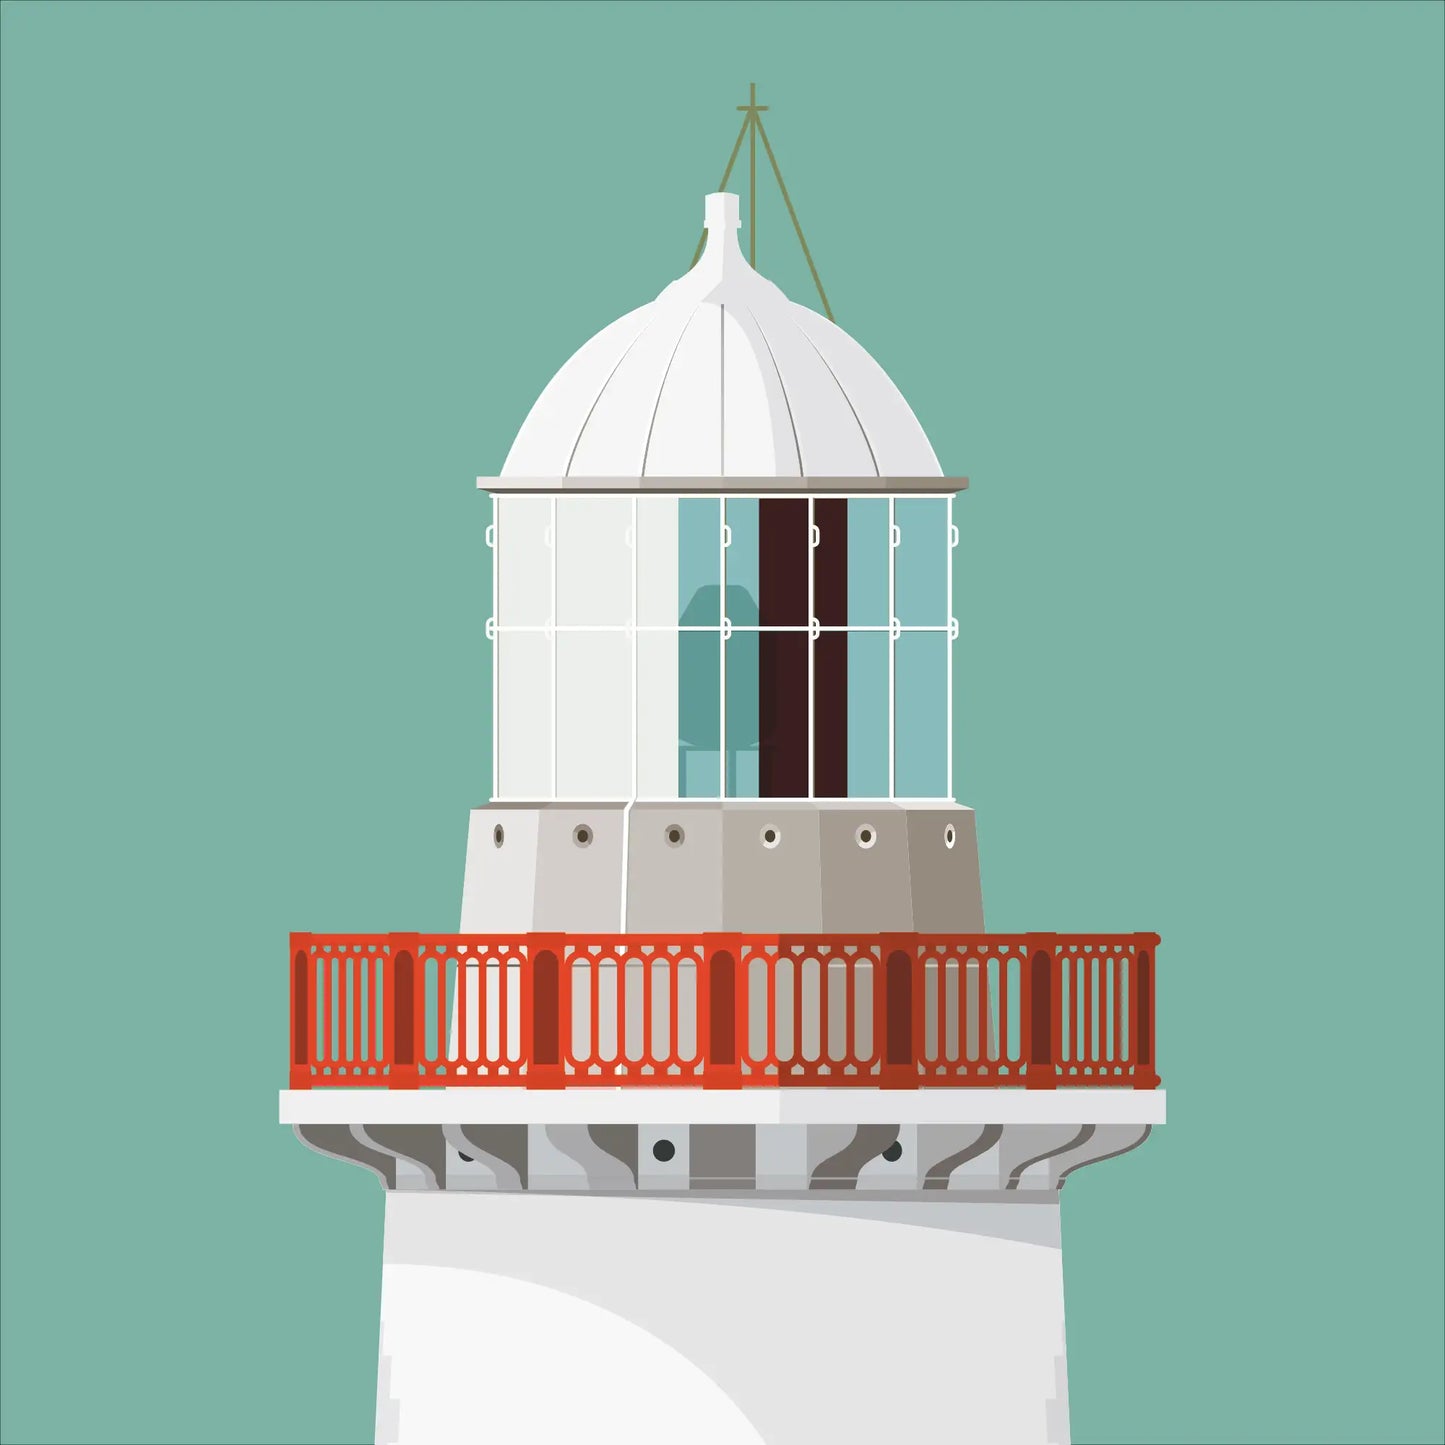 Ballinacourty lighthouse, County Waterford, Ireland detail